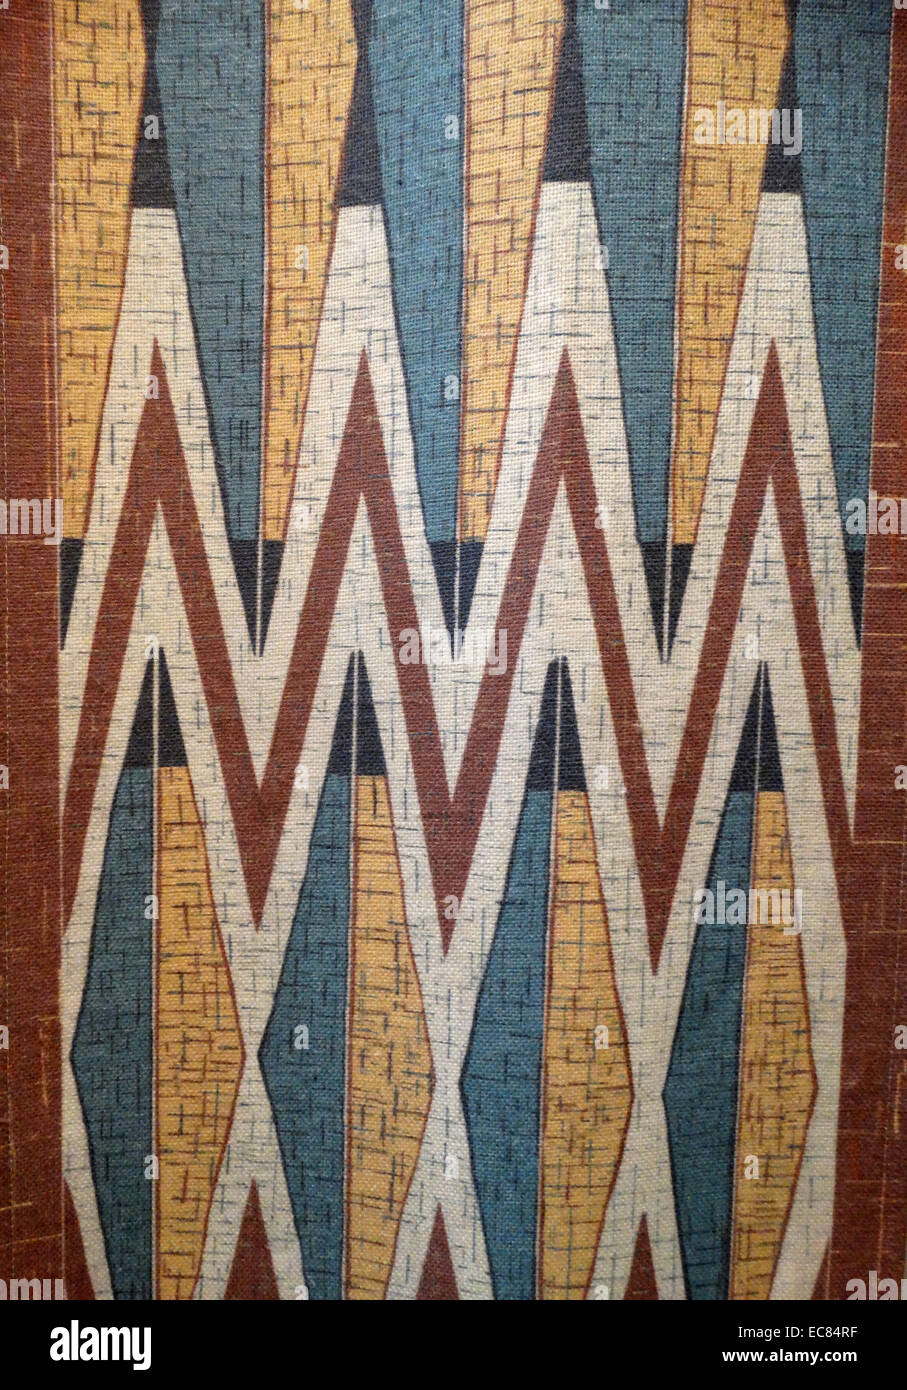 Replica Ancient Egyptian Mat work hanging. Copied from woven mats made of reeds; they were in use as wall decorations in official dwellings and official buildings as well as tombs throughout ancient Egypt. Recreated in 2011 Stock Photo